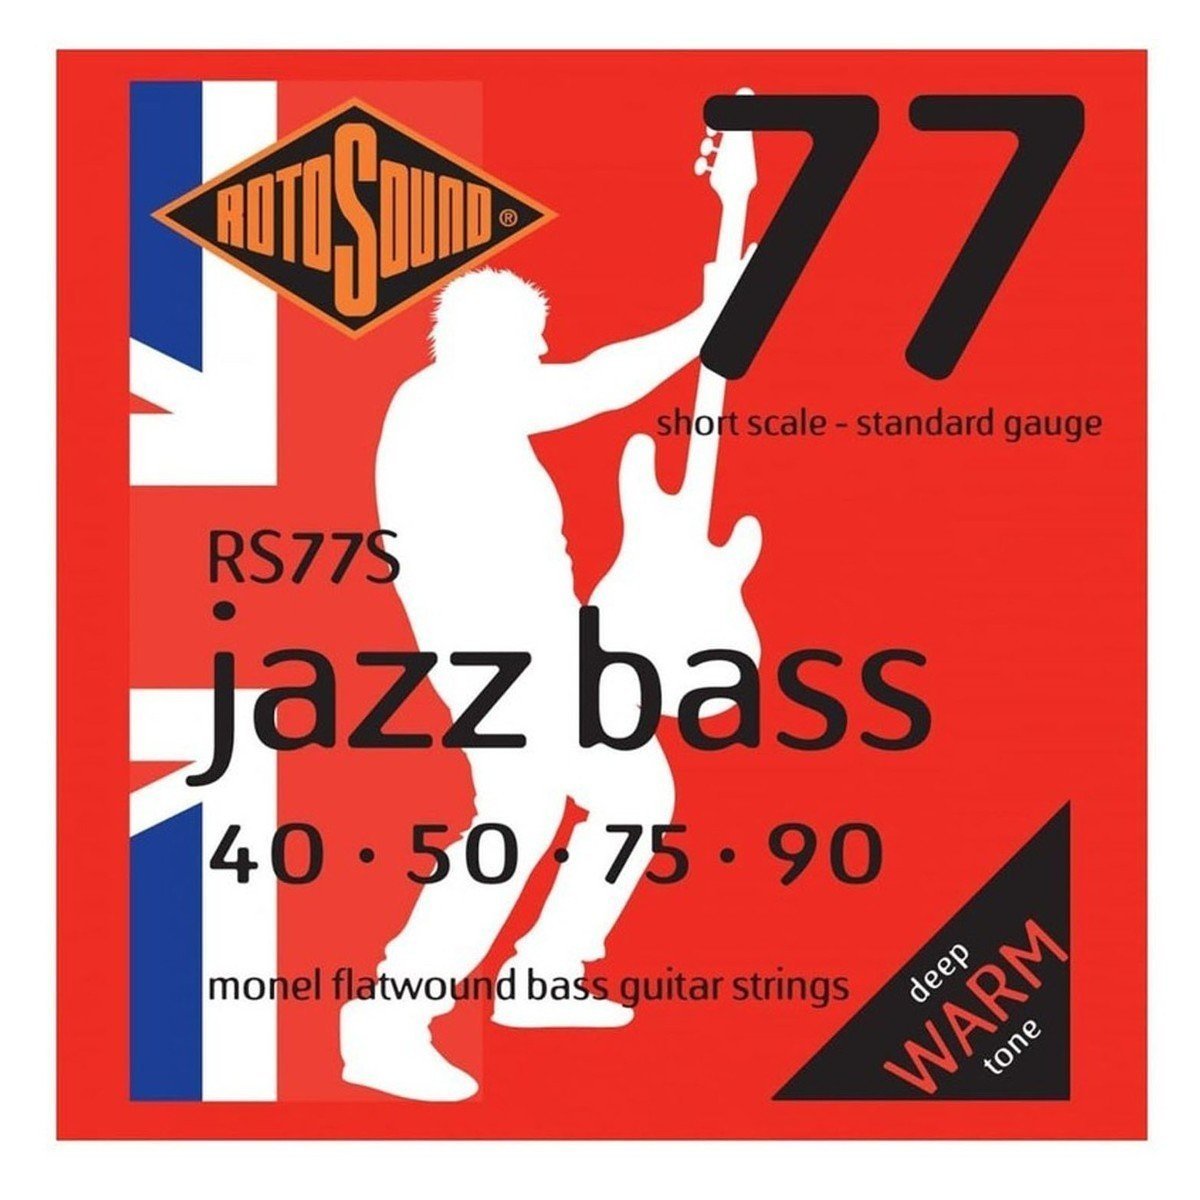 Bass strings Rotosound RS77S